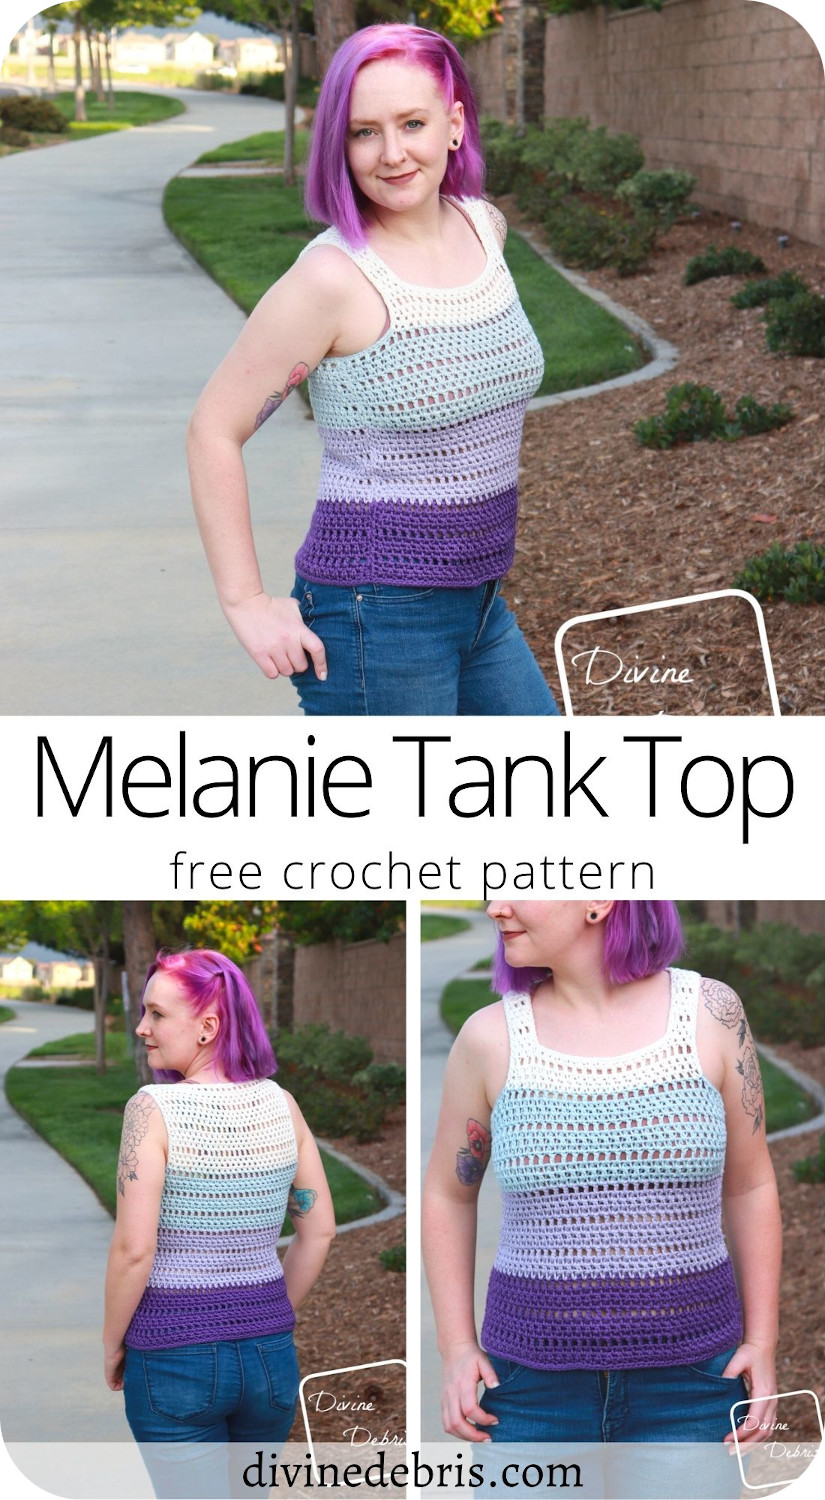 Learn to make the easy, fun, and customizable summer top, the Melanie Tank Top, from a free crochet pattern on DivineDebris.com